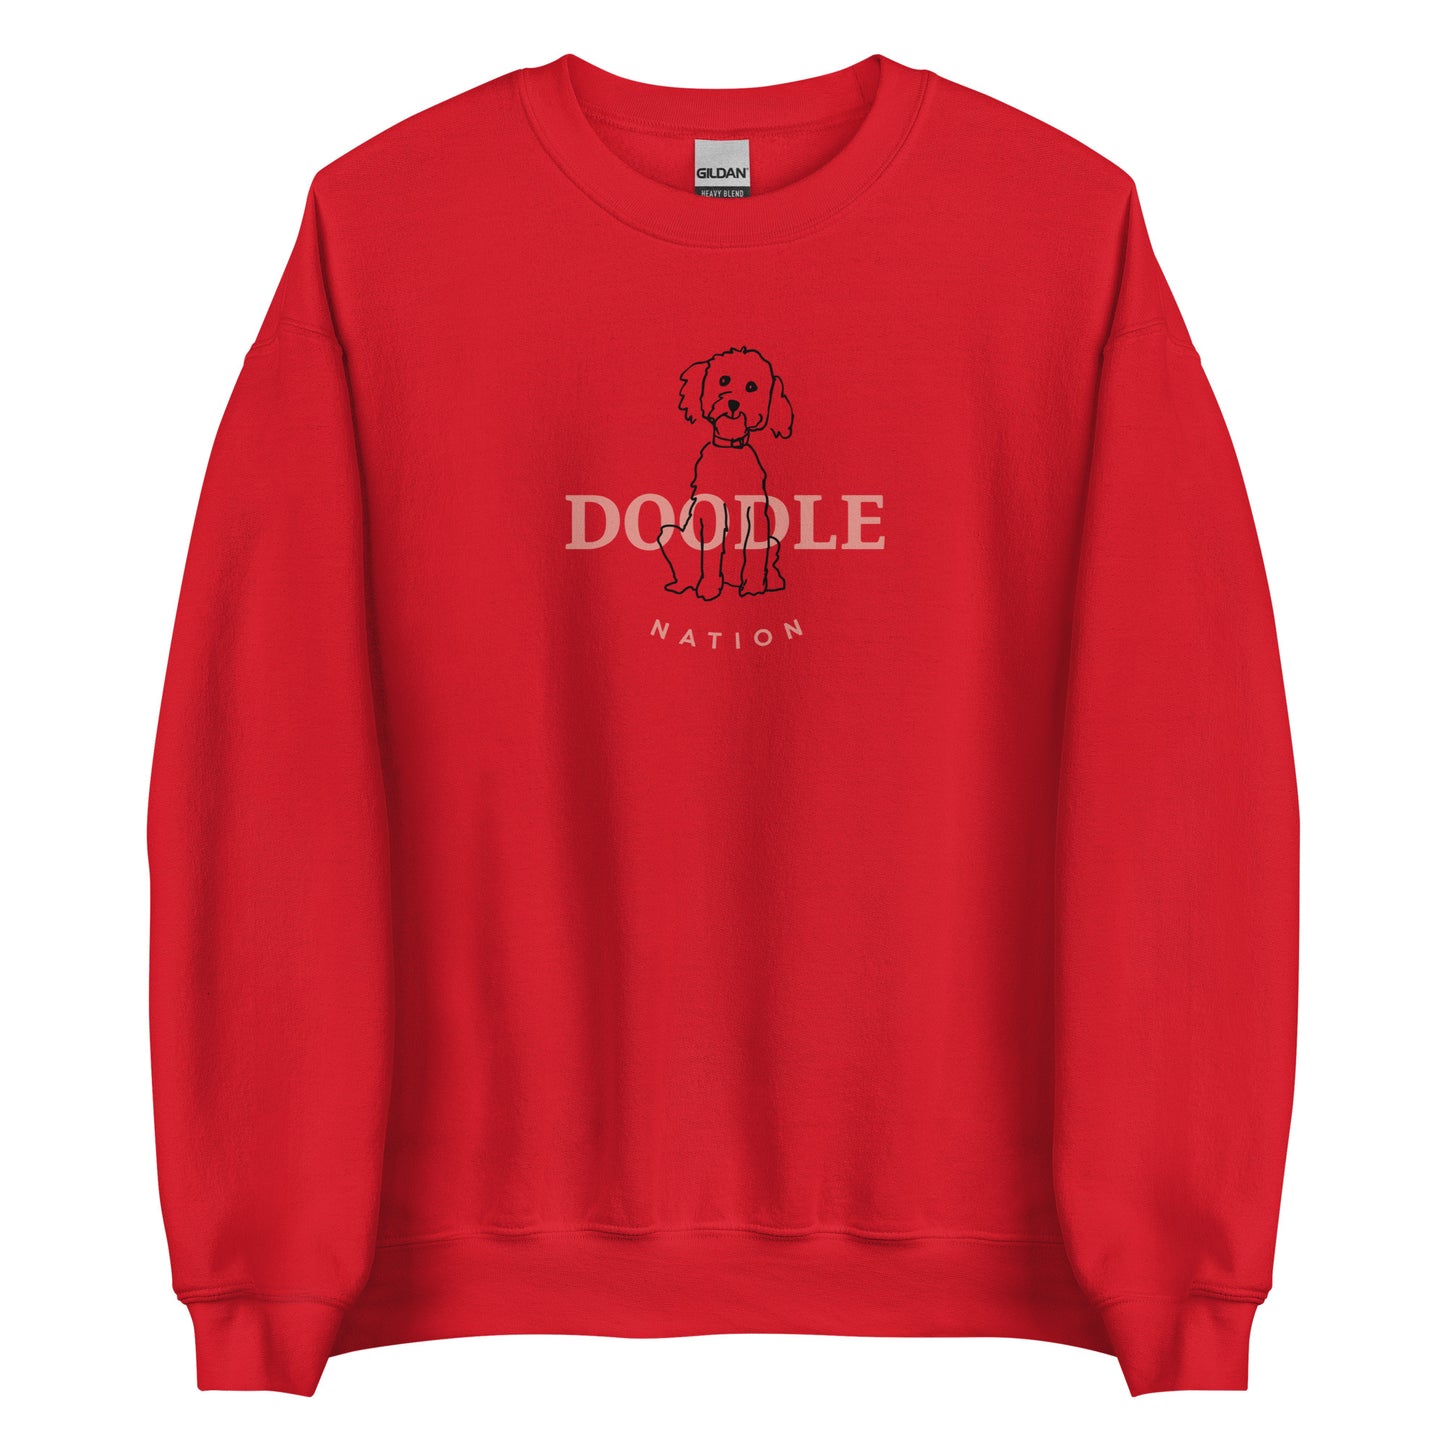 Goldendoodle crew neck sweatshirt with Goldendoodle and words "Doodle Nation" in red color